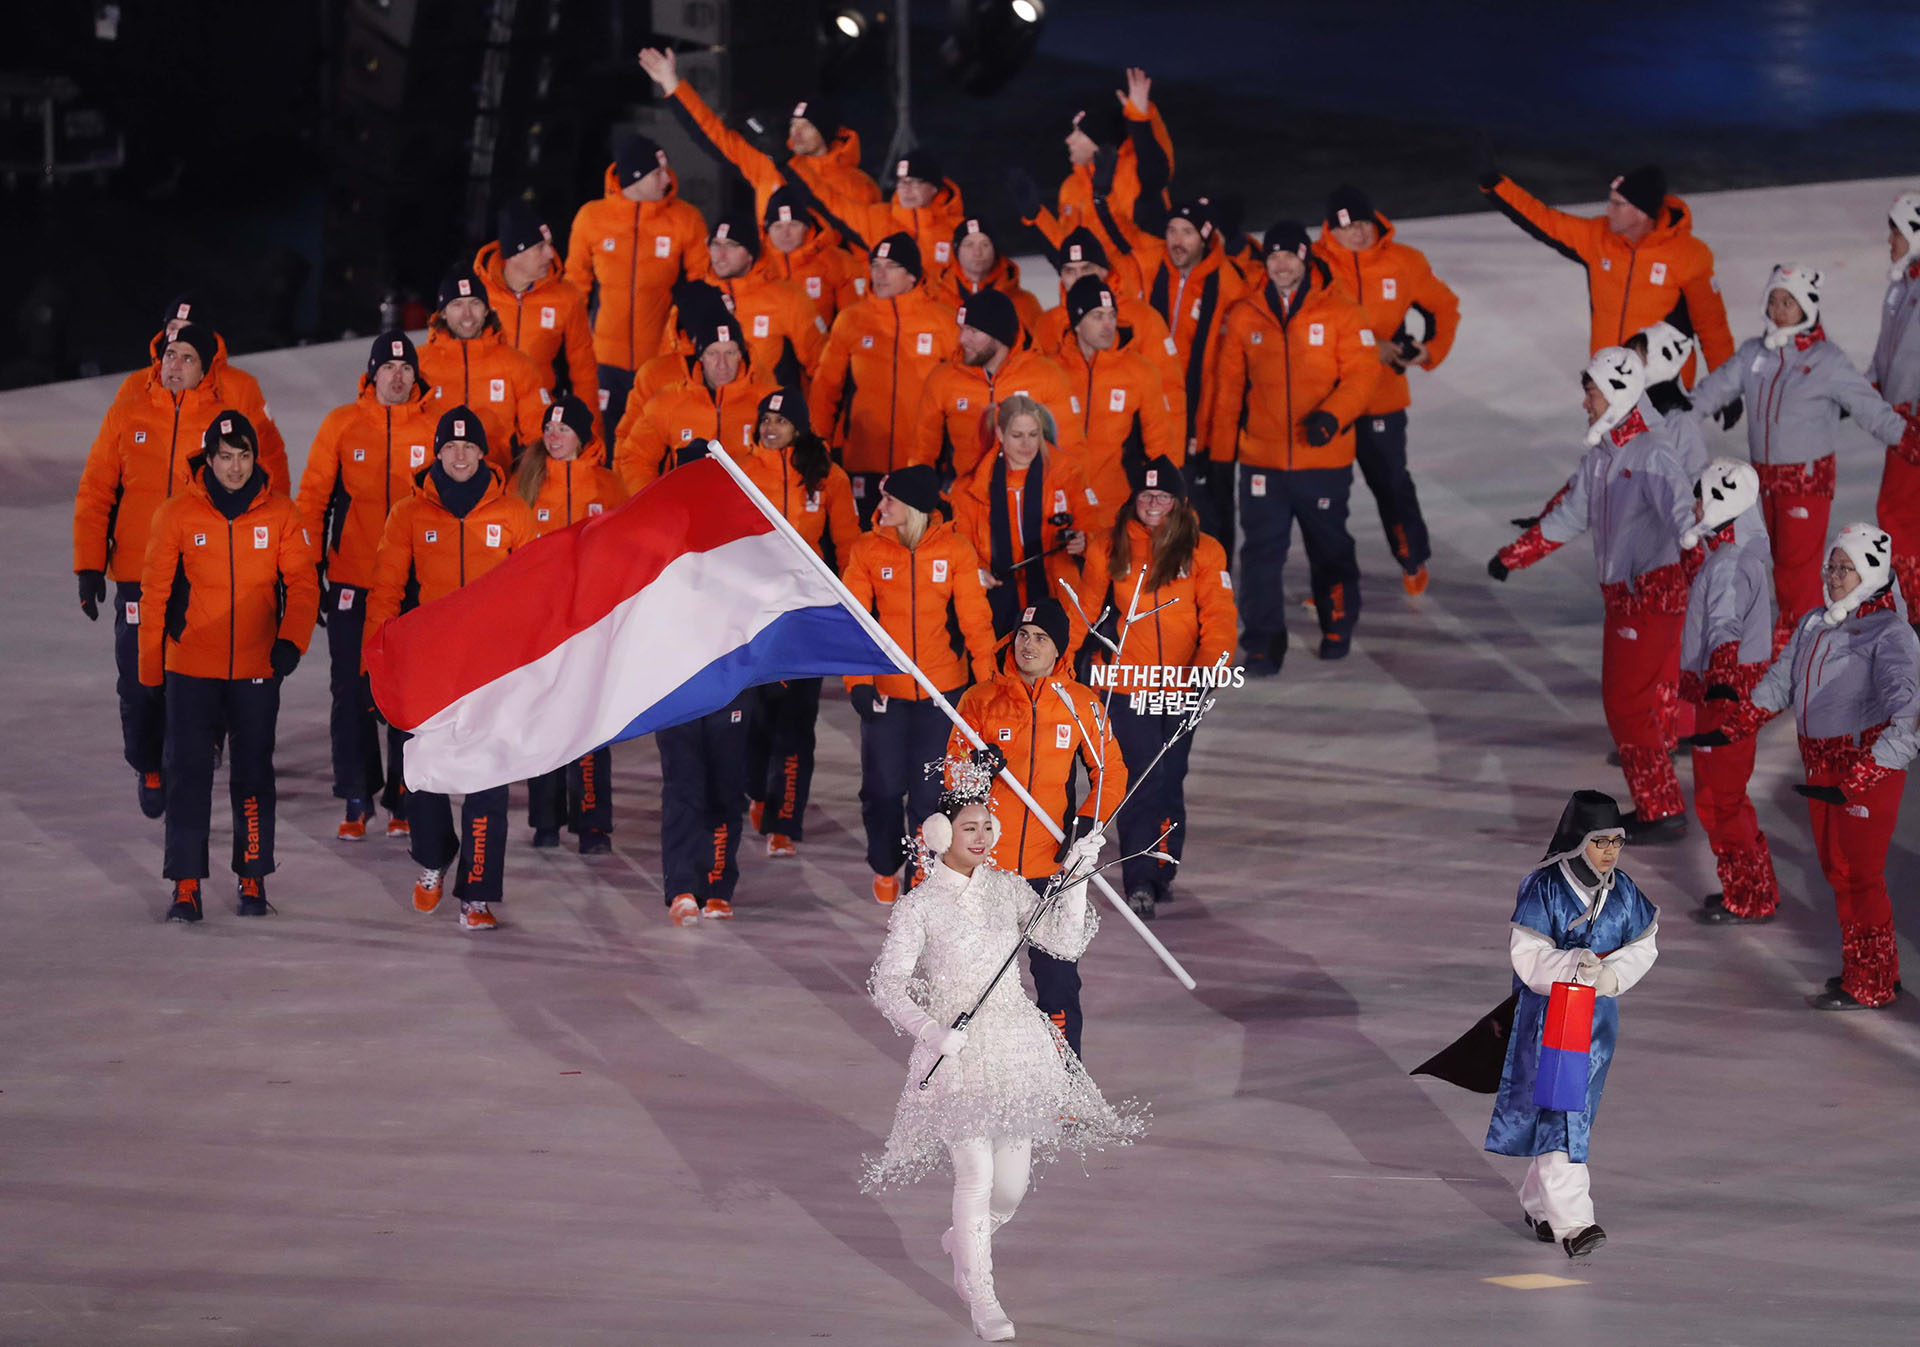 Dutch Olympians told to not bring any cellphones or laptops to Beijing